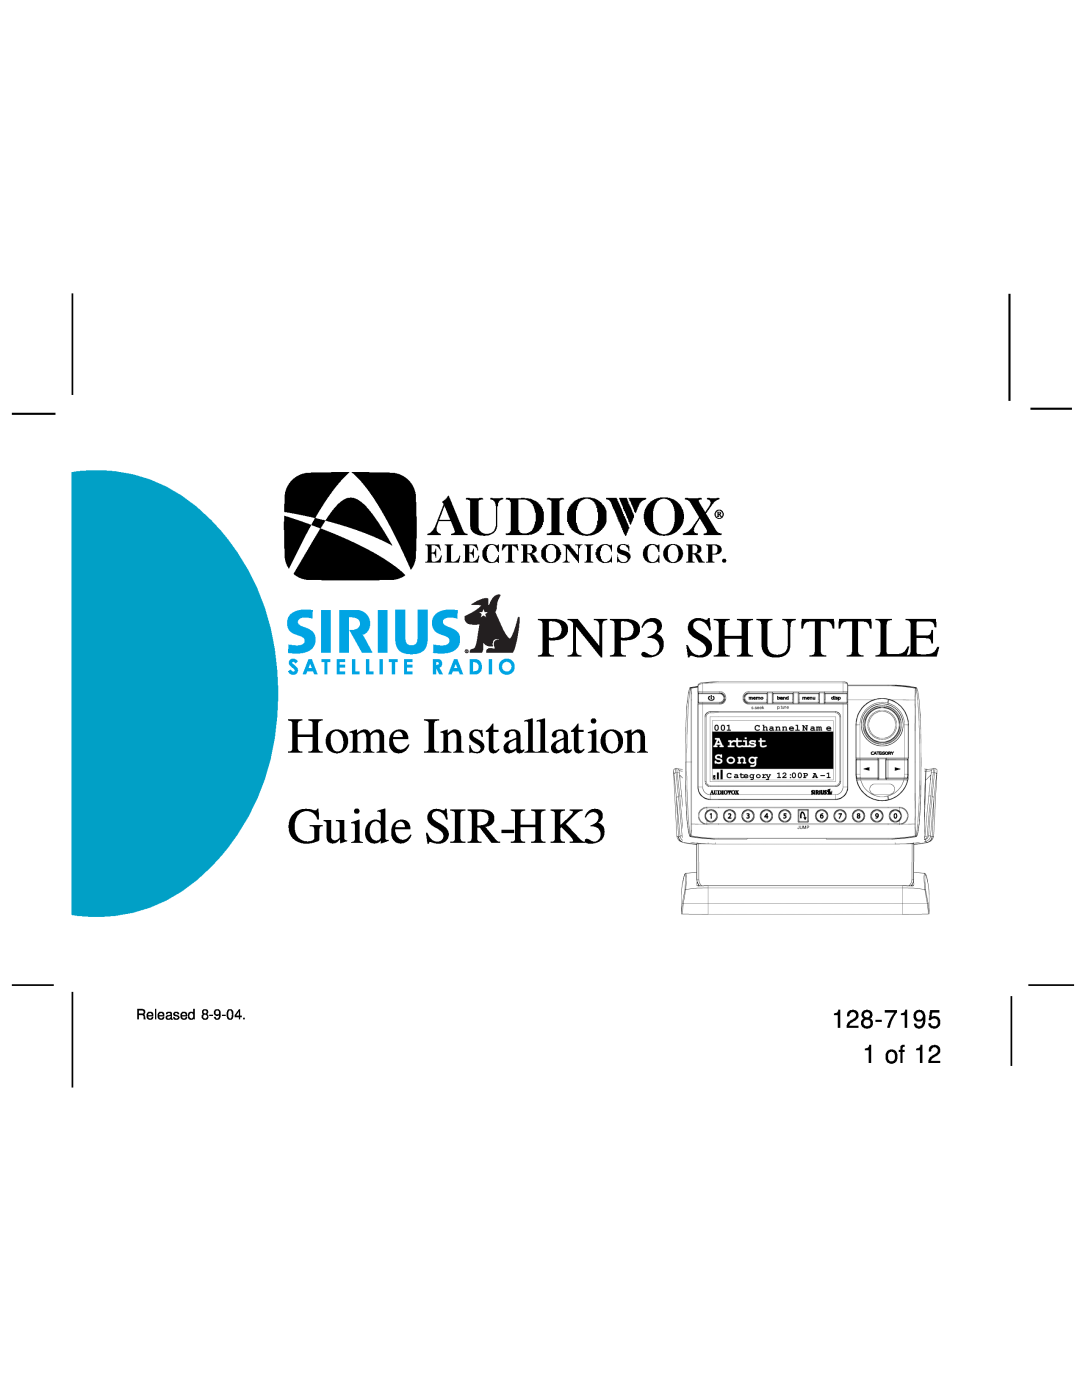 Audiovox manual 128-7195 1 of, PNP3 SHUTTLE, Home Installation Guide SIR-HK3, A rtist, S ong, C hannel N am e, Jump 